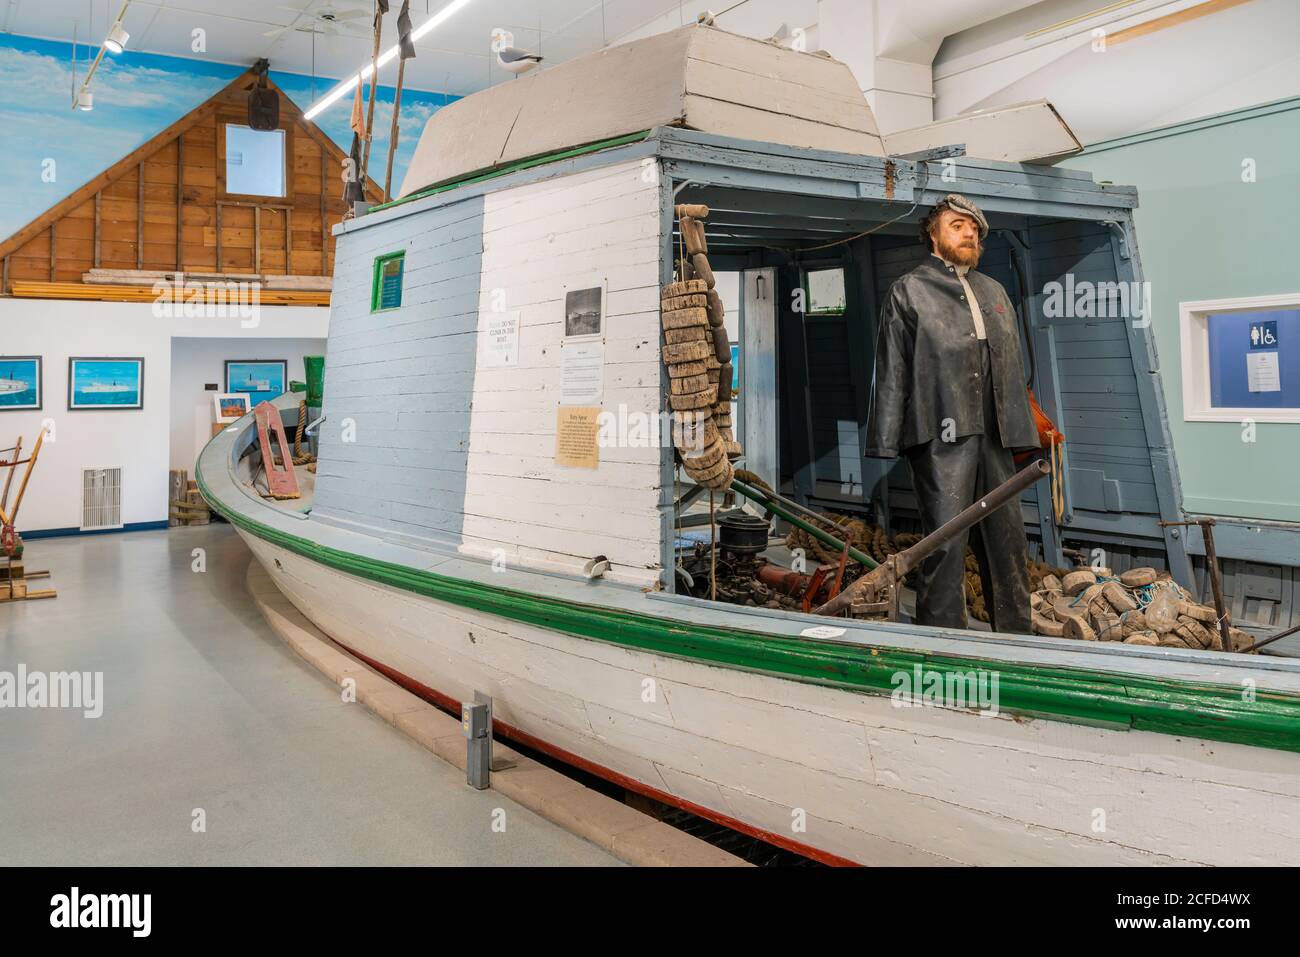 A fishing boat exhibit inside the Tourist Information building in Gimli, Manitoba, Canada. Stock Photo